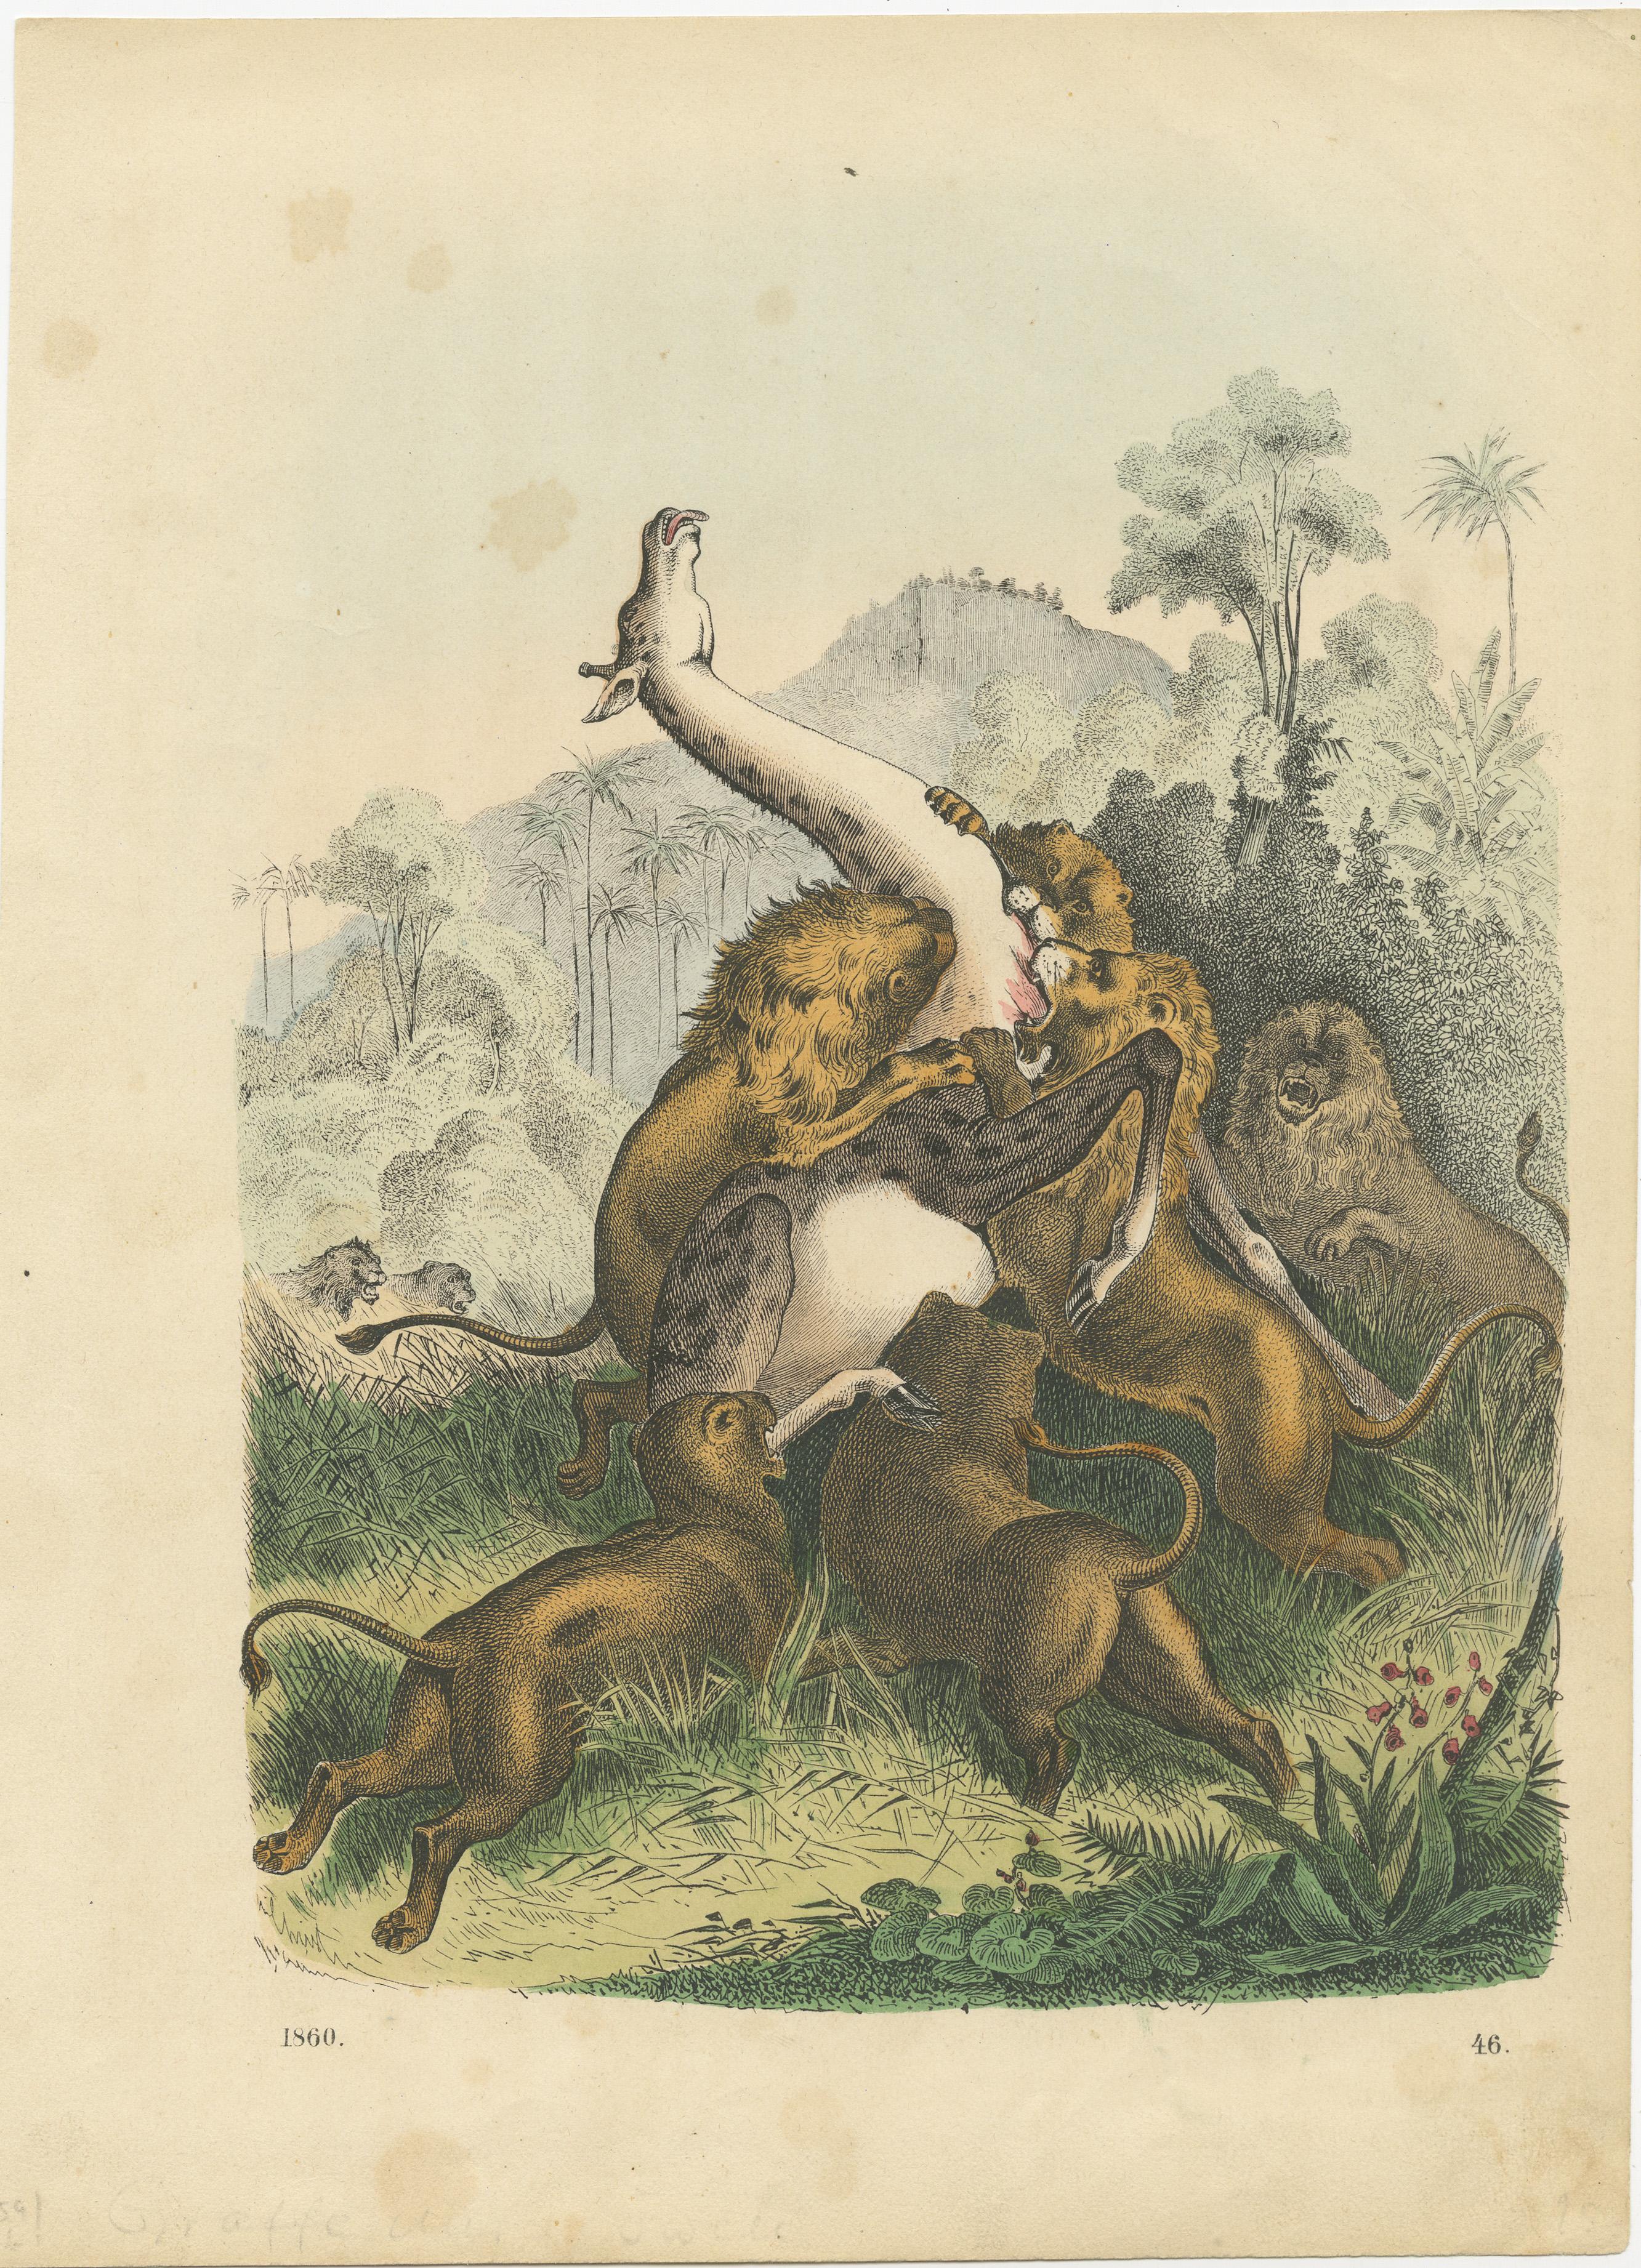 Original old print of lions attacking a giraffe. Published circa 1860.